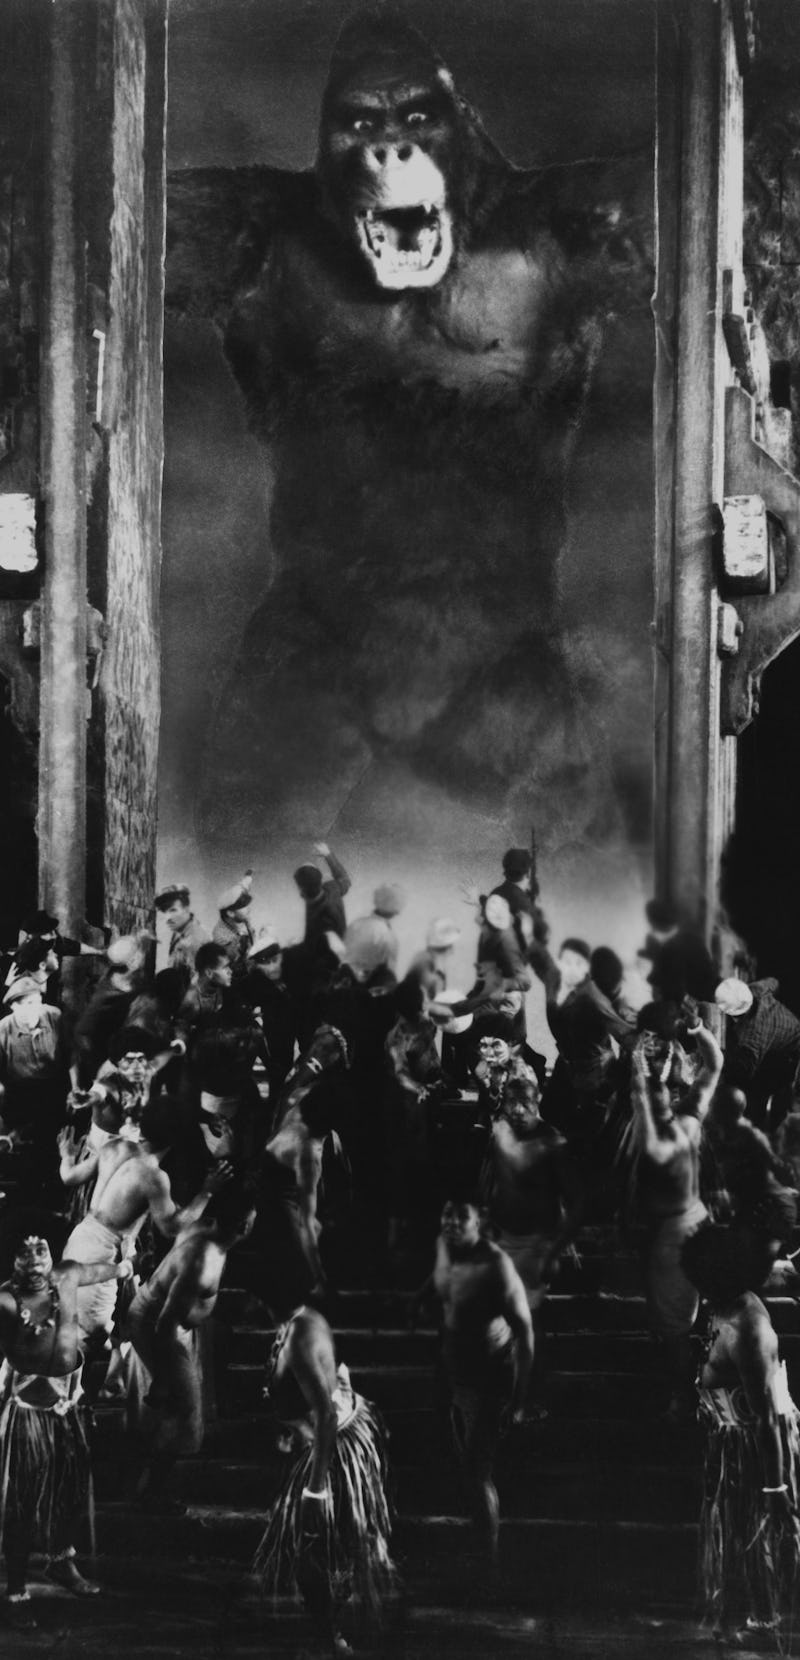 The giant ape terrorises the village on Skull Island in the movie 'King Kong', 1933. (Photo by Silve...